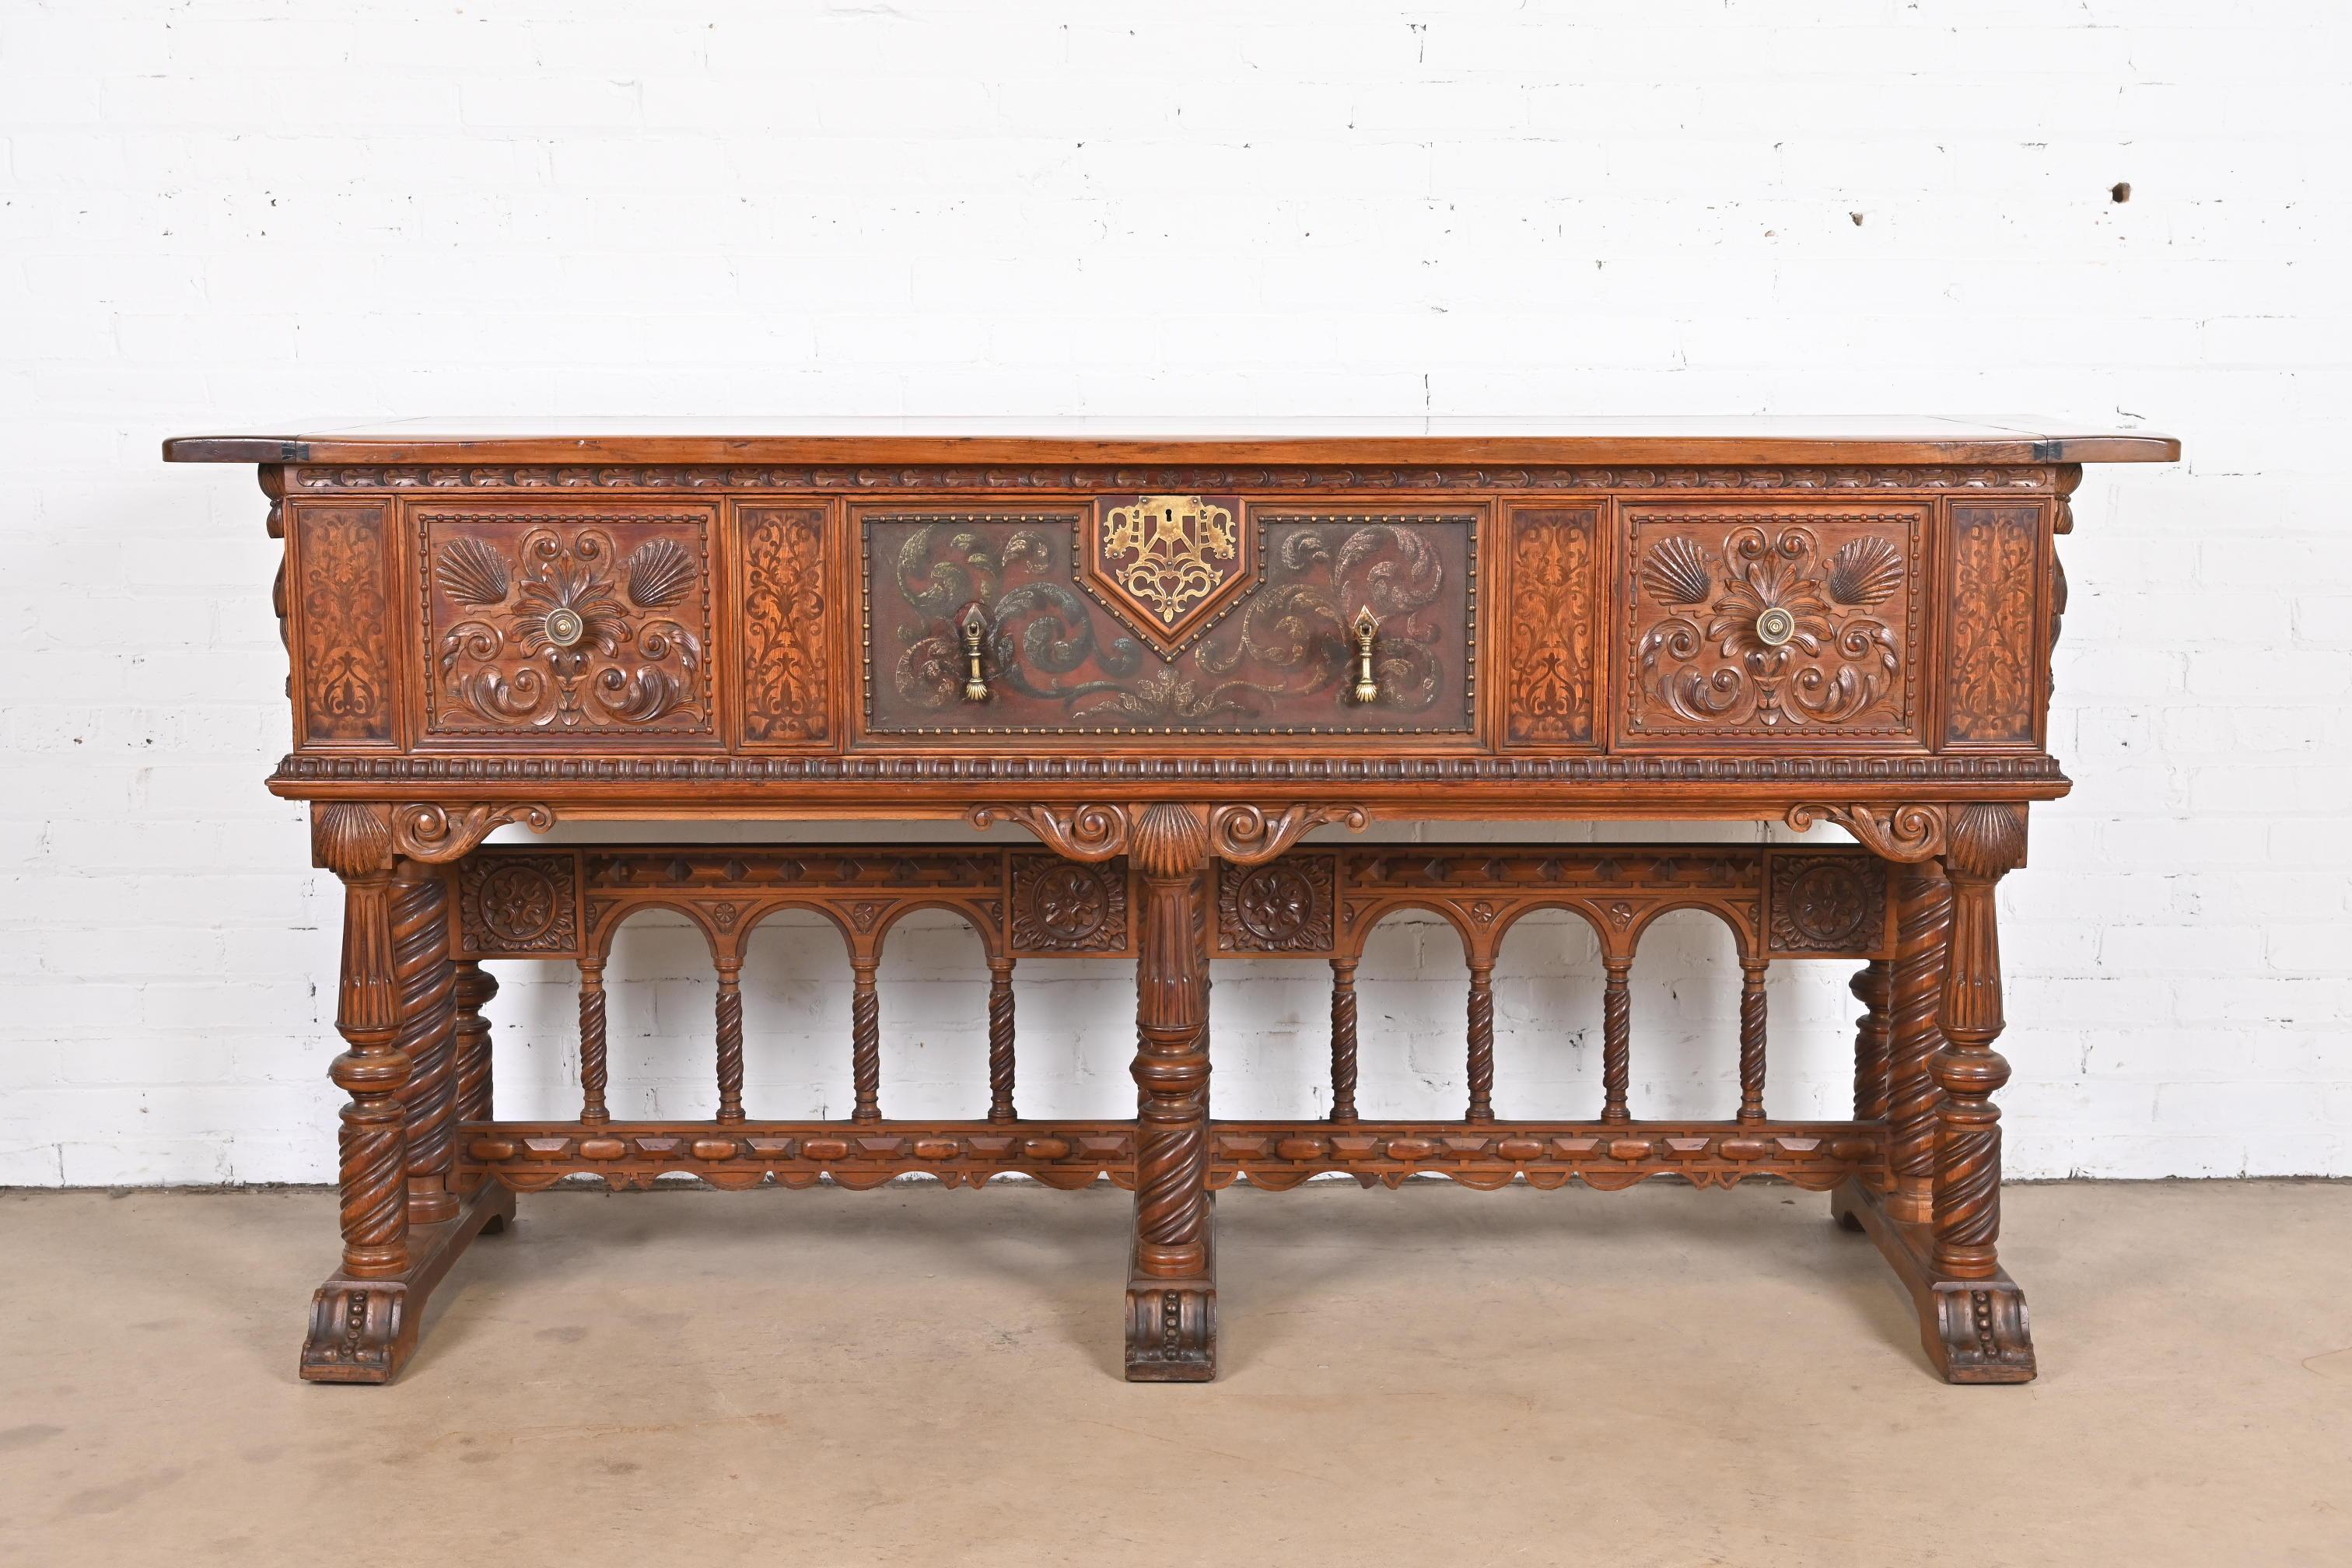 An exceptional Jacobean style sideboard buffet or credenza

From the exclusive 